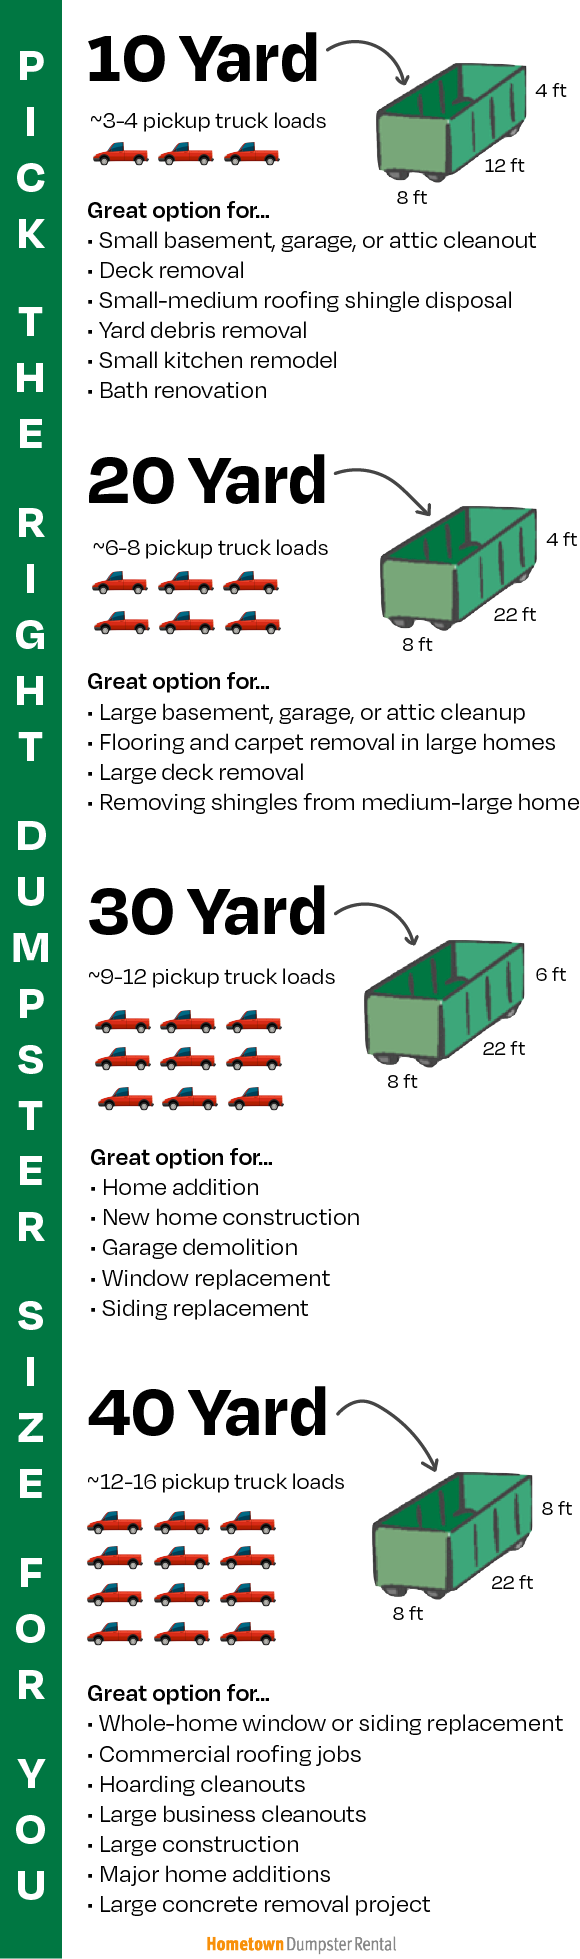 Infographic of dumpster rental sizes and how many pickup truckloads can fit in each